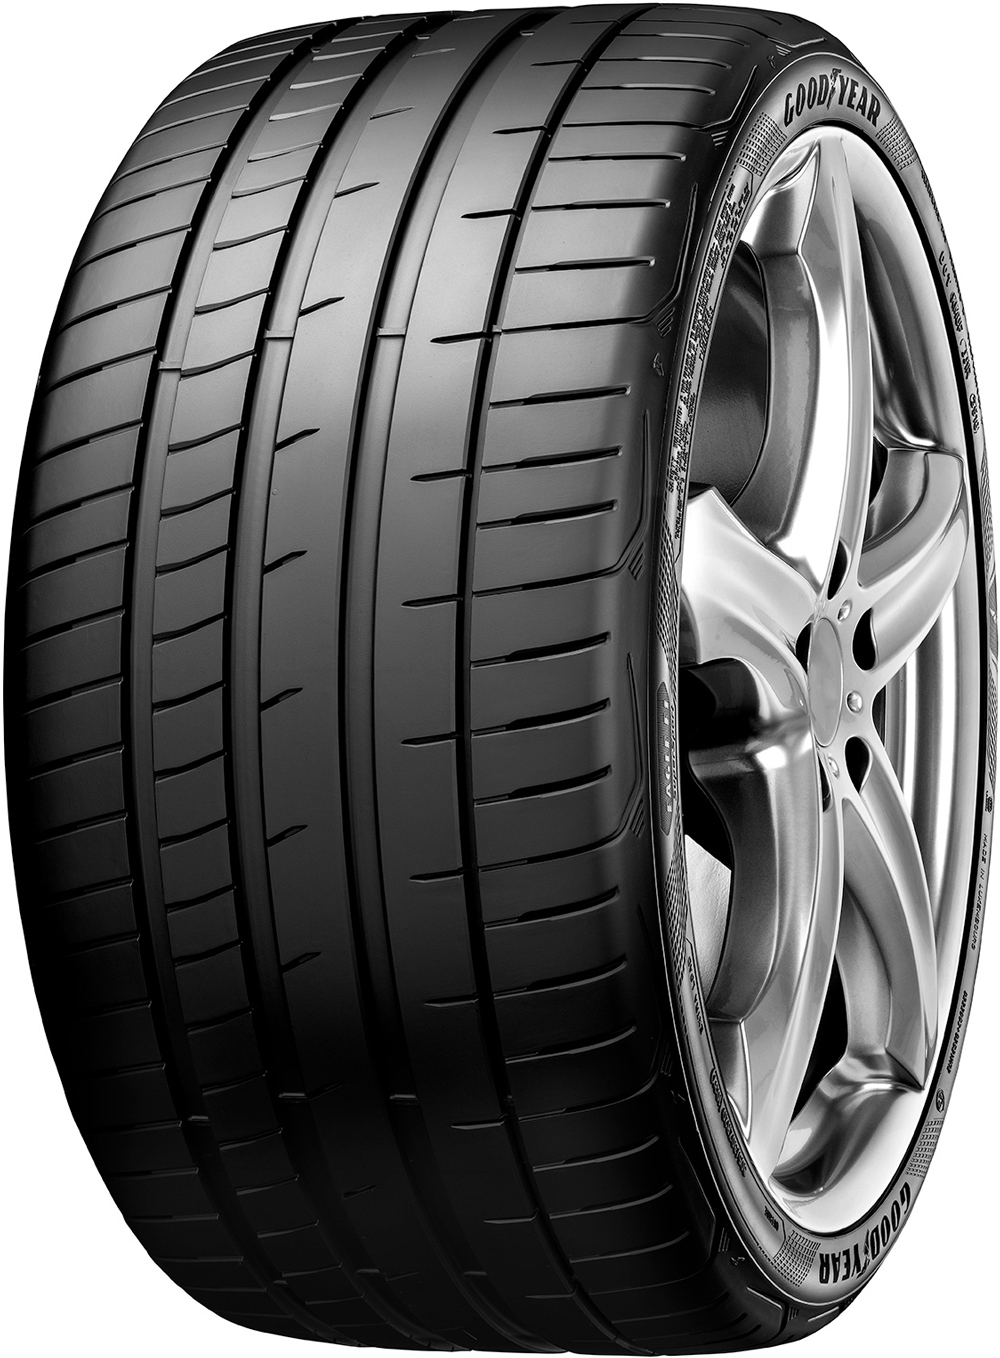 Anvelope auto GOODYEAR EAG F1 SUPERSPORT XL FP 235/35 R19 91Y